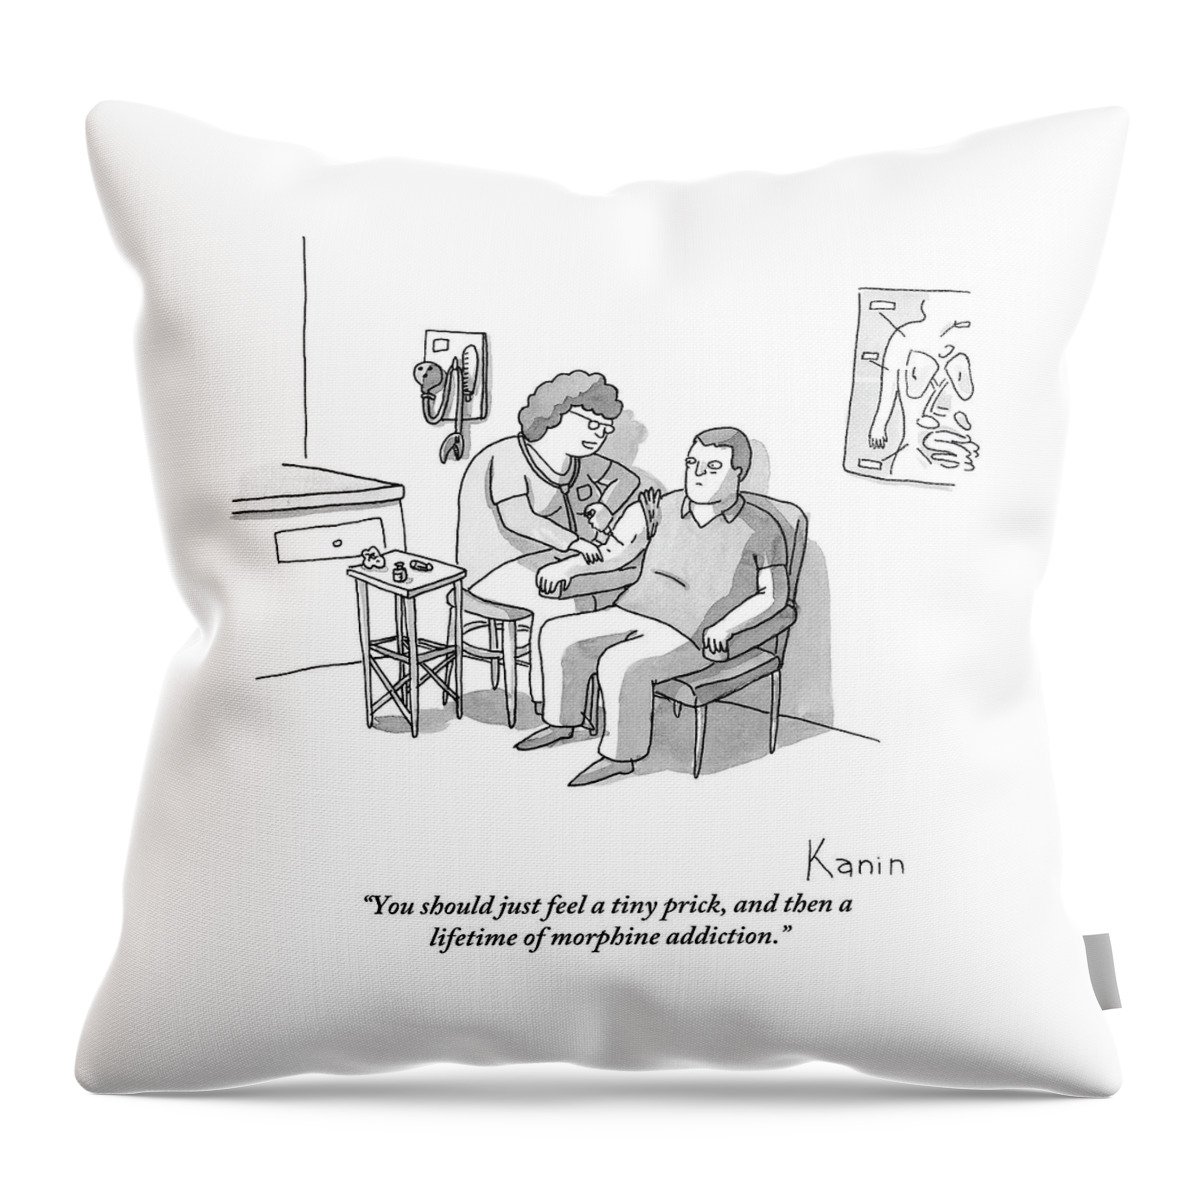 Two People - Boy And Female Nurse - In Doctor's Throw Pillow